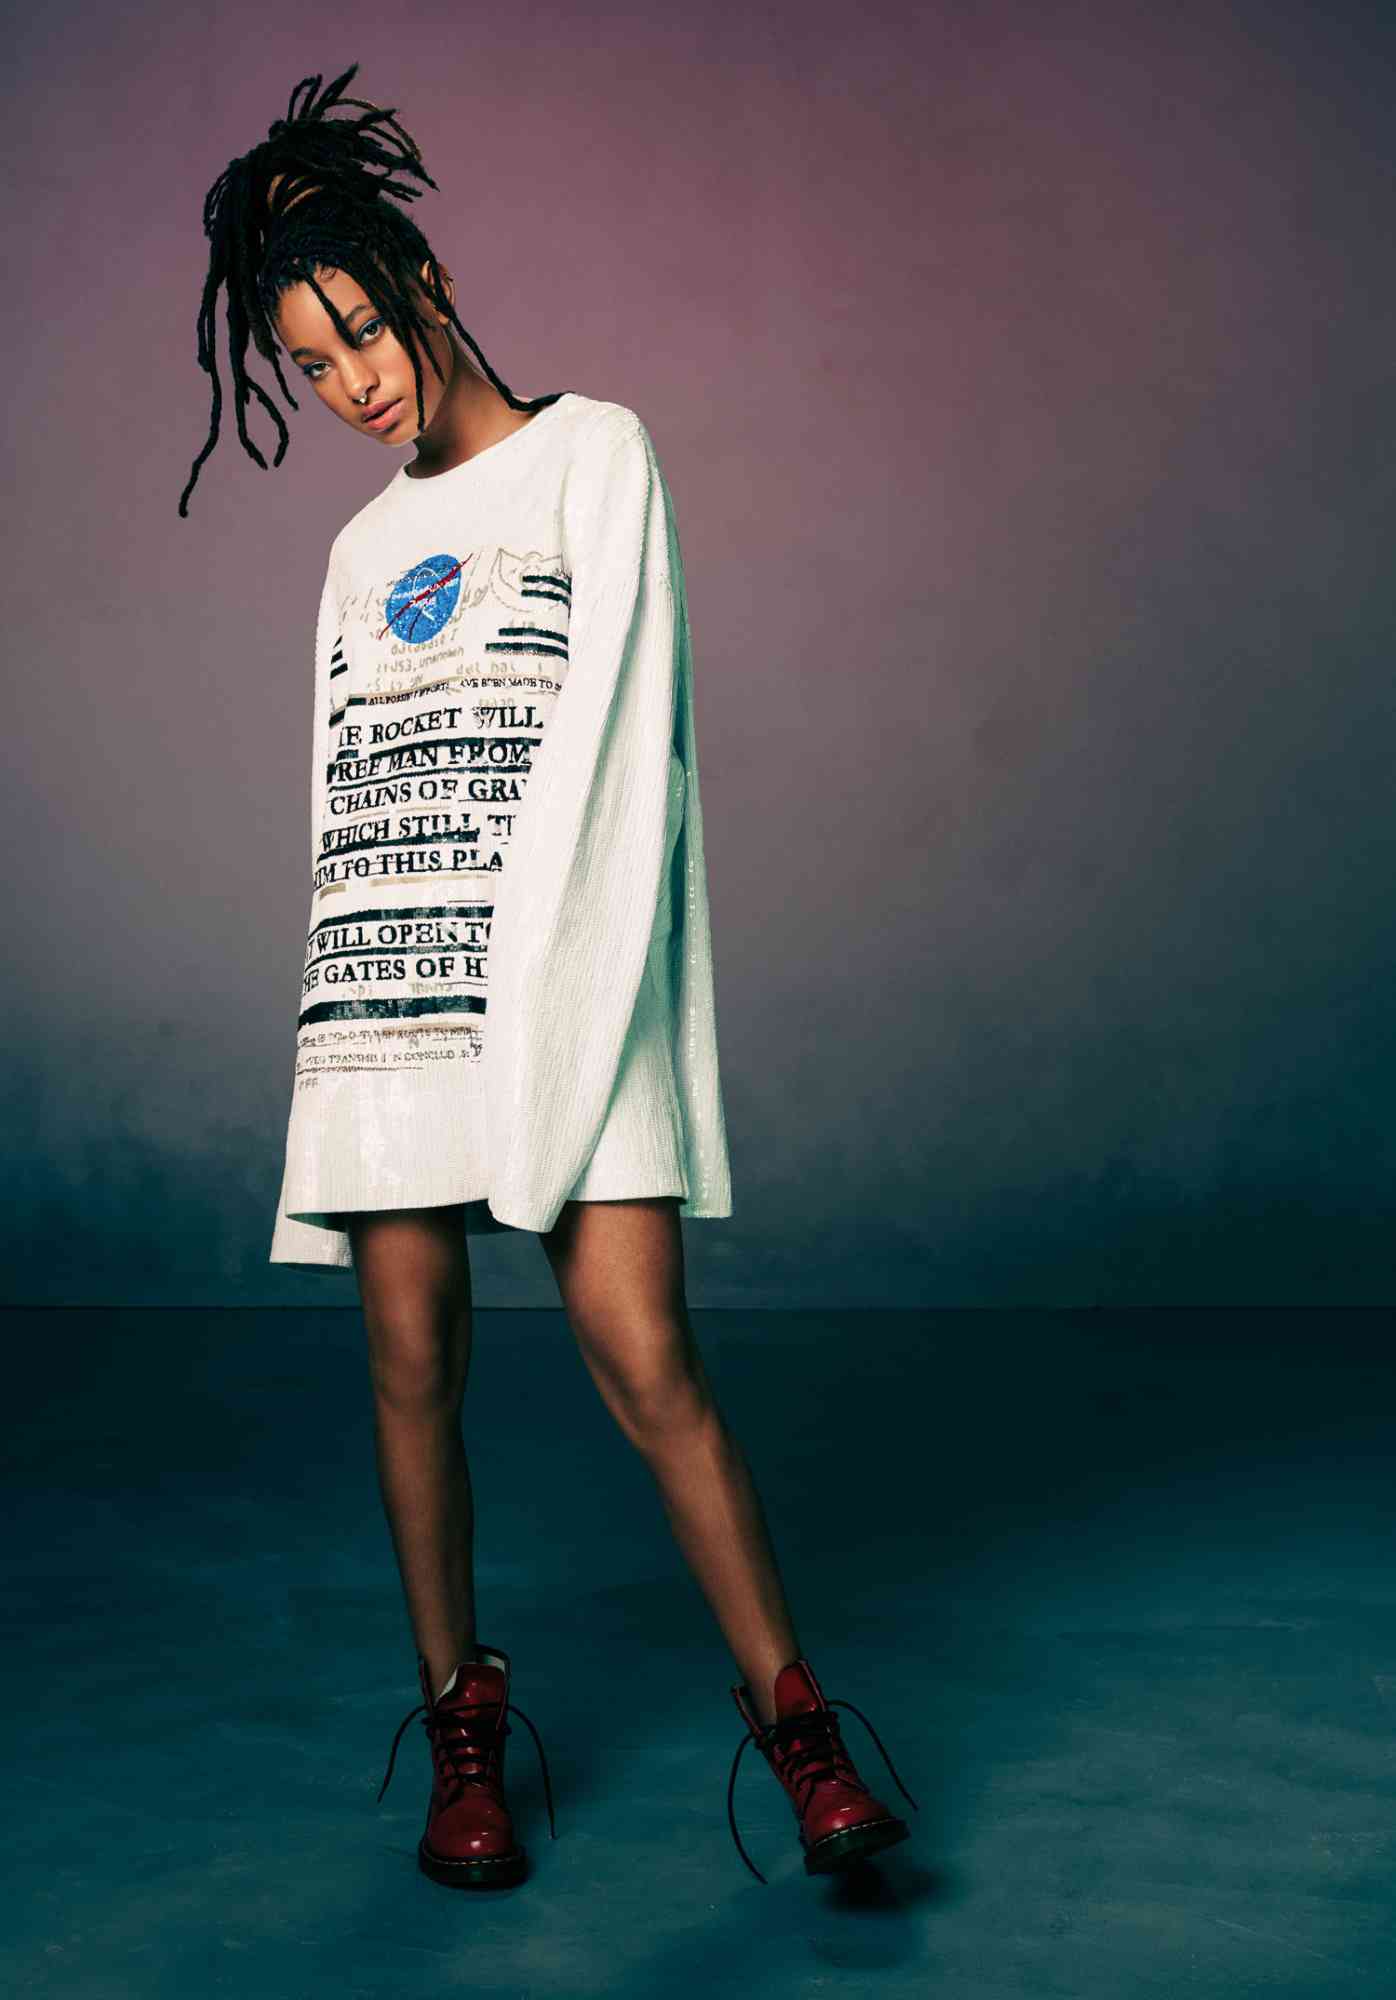 Iconic Images of willow smith album/song cover shot by Warwick Saint